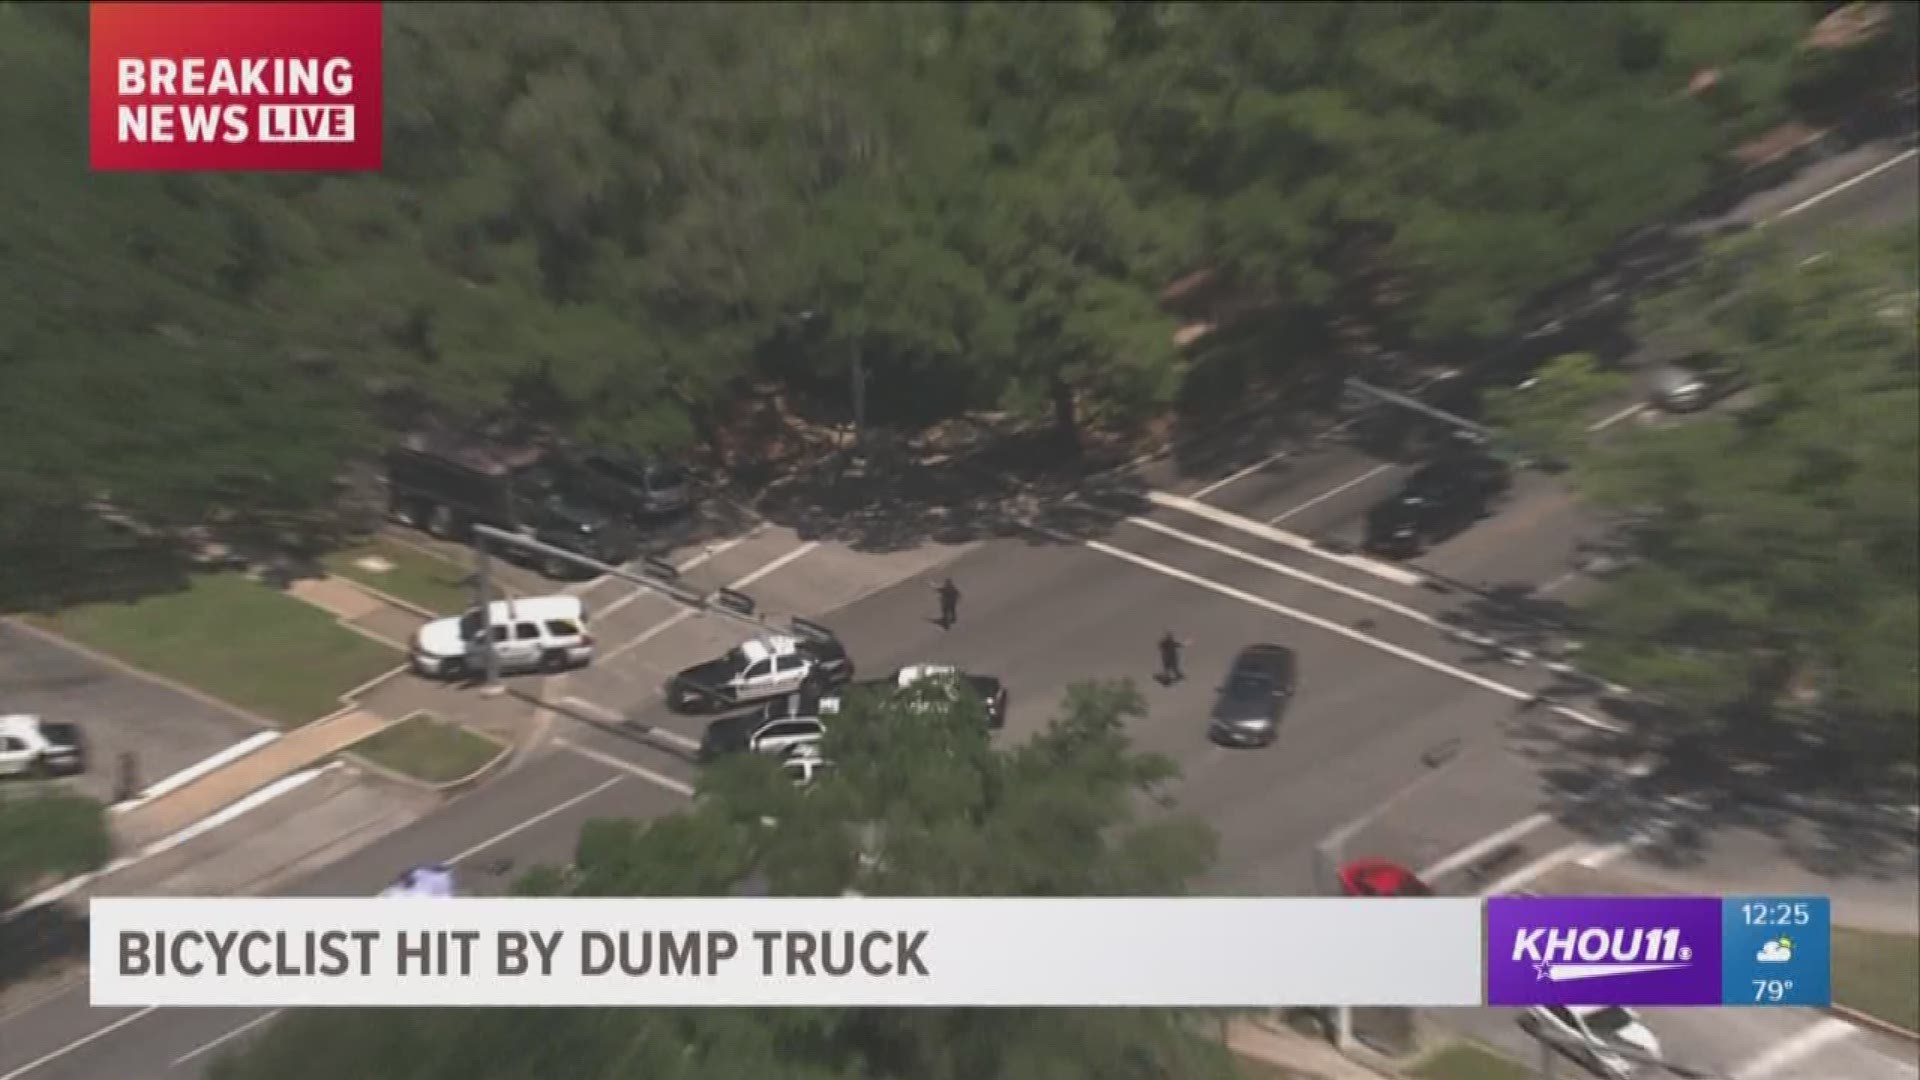 Police say a woman died after being hit by a dump truck, while riding her bike near Rice University Tuesday.